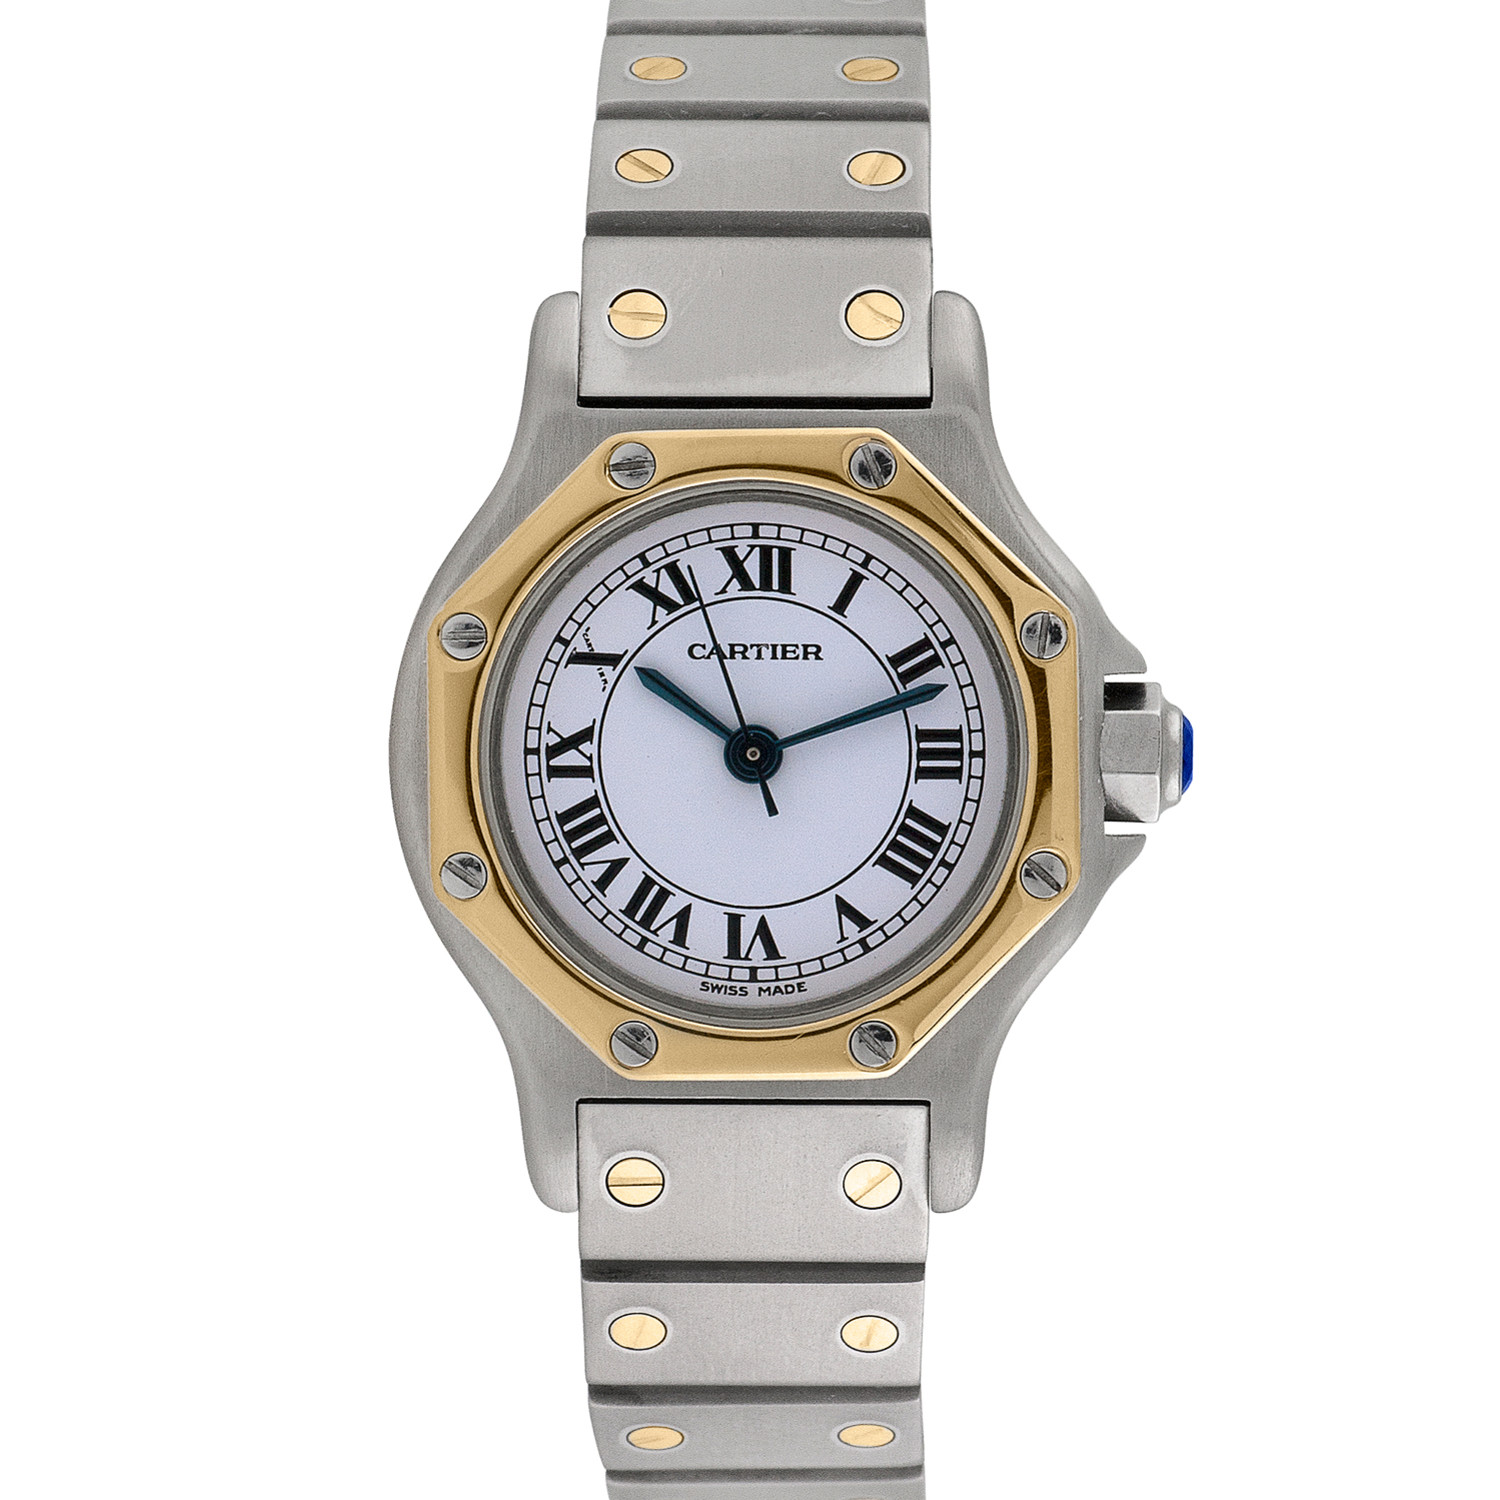 Cartier Ladies Watches For Sale - Kare Eleonora